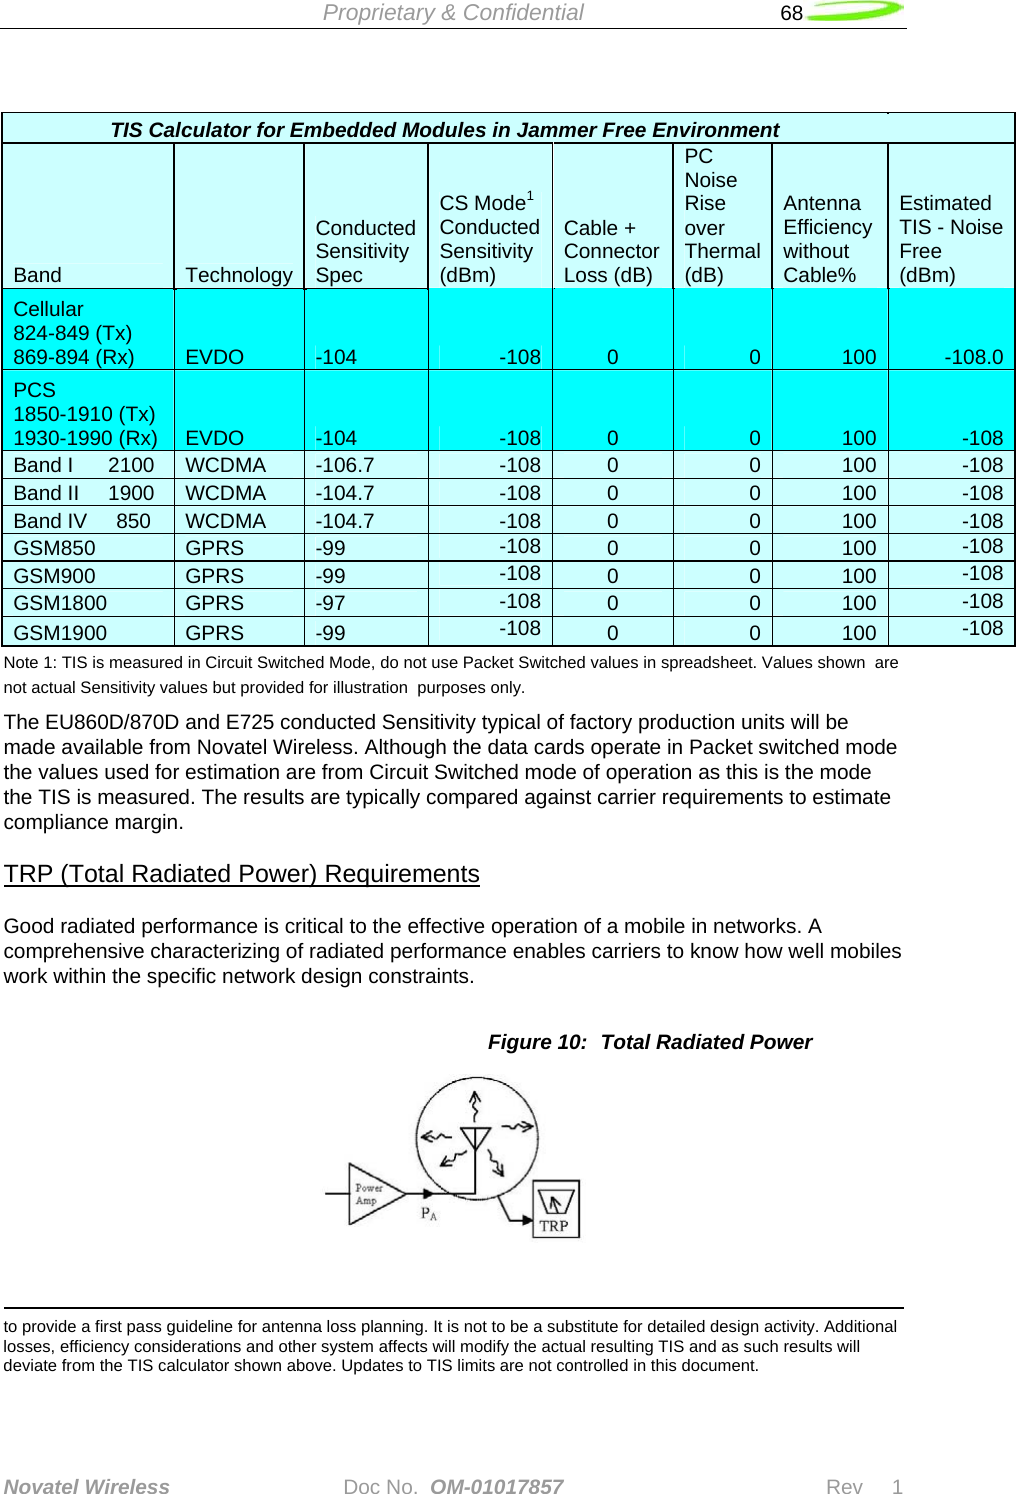  Proprietary &amp; Confidential   68   Novatel Wireless   Doc No.  OM-01017857                              Rev     1   TIS Calculator for Embedded Modules in Jammer Free Environment    Band  Technology Conducted  Sensitivity Spec CS Mode1 Conducted Sensitivity (dBm) Cable + Connector  Loss (dB) PC Noise Rise over Thermal (dB) Antenna Efficiency without Cable% Estimated TIS - Noise Free (dBm) Cellular              824-849 (Tx)       869-894 (Rx)  EVDO  -104  -108  0  0  100 -108.0PCS             1850-1910 (Tx) 1930-1990 (Rx)  EVDO  -104  -108 0  0  100 -108Band I      2100   WCDMA  -106.7  -108 0  0  100 -108Band II     1900  WCDMA  -104.7  -108 0  0  100 -108Band IV     850  WCDMA  -104.7  -108 0  0  100 -108GSM850  GPRS  -99  -108 0  0  100 -108GSM900  GPRS  -99  -108 0  0  100 -108GSM1800  GPRS  -97  -108 0  0  100 -108GSM1900  GPRS  -99  -108 0  0  100 -108Note 1: TIS is measured in Circuit Switched Mode, do not use Packet Switched values in spreadsheet. Values shown  are not actual Sensitivity values but provided for illustration  purposes only.  The EU860D/870D and E725 conducted Sensitivity typical of factory production units will be made available from Novatel Wireless. Although the data cards operate in Packet switched mode the values used for estimation are from Circuit Switched mode of operation as this is the mode the TIS is measured. The results are typically compared against carrier requirements to estimate compliance margin. TRP (Total Radiated Power) Requirements Good radiated performance is critical to the effective operation of a mobile in networks. A comprehensive characterizing of radiated performance enables carriers to know how well mobiles work within the specific network design constraints.  Figure 10:  Total Radiated Power                                                                                                                                                                 to provide a first pass guideline for antenna loss planning. It is not to be a substitute for detailed design activity. Additional losses, efficiency considerations and other system affects will modify the actual resulting TIS and as such results will deviate from the TIS calculator shown above. Updates to TIS limits are not controlled in this document.  